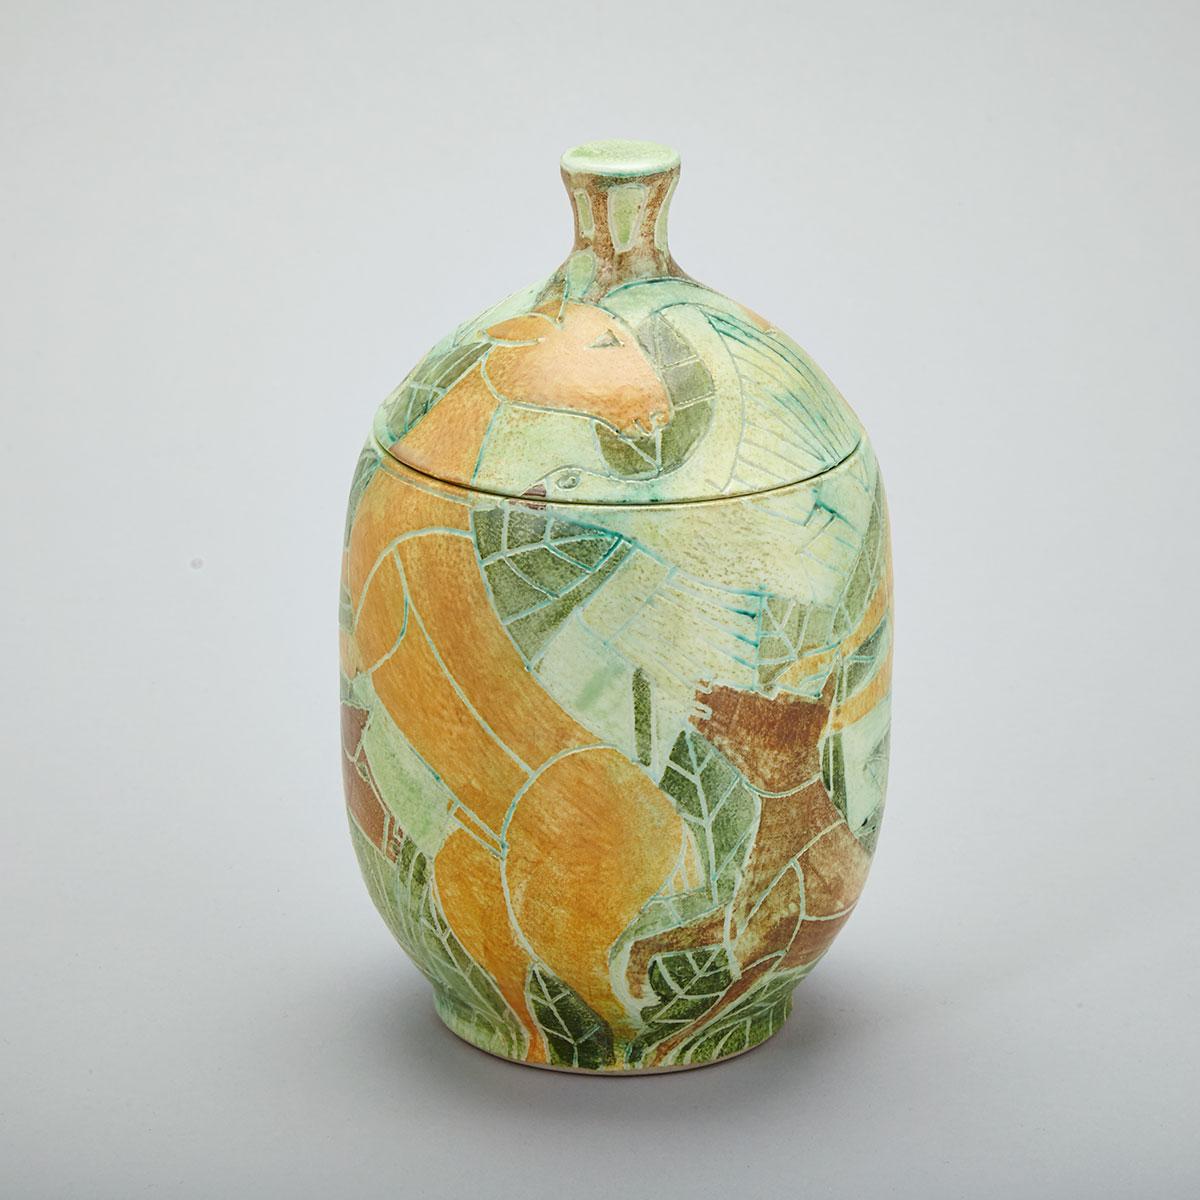 Brooklin Pottery Covered Jar, Theo and Susan Harlander, c.1975